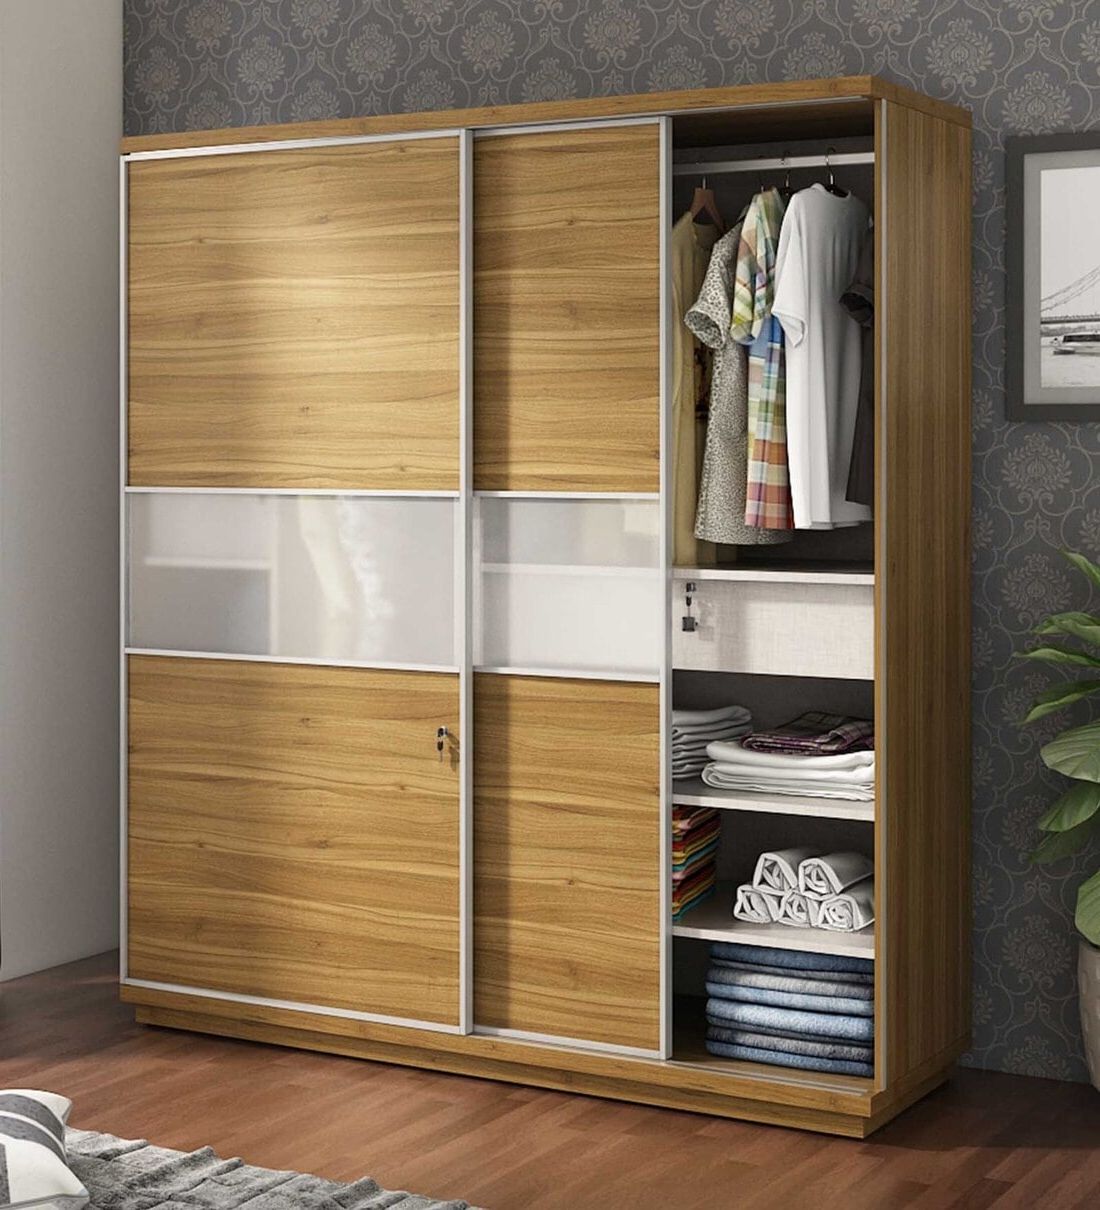 Buy Kosmo Universal Sliding Door Wardrobe In Natural Teak At 33% Off Spacewood | Pepperfry Pertaining To Wardrobes With 2 Sliding Doors (View 9 of 20)